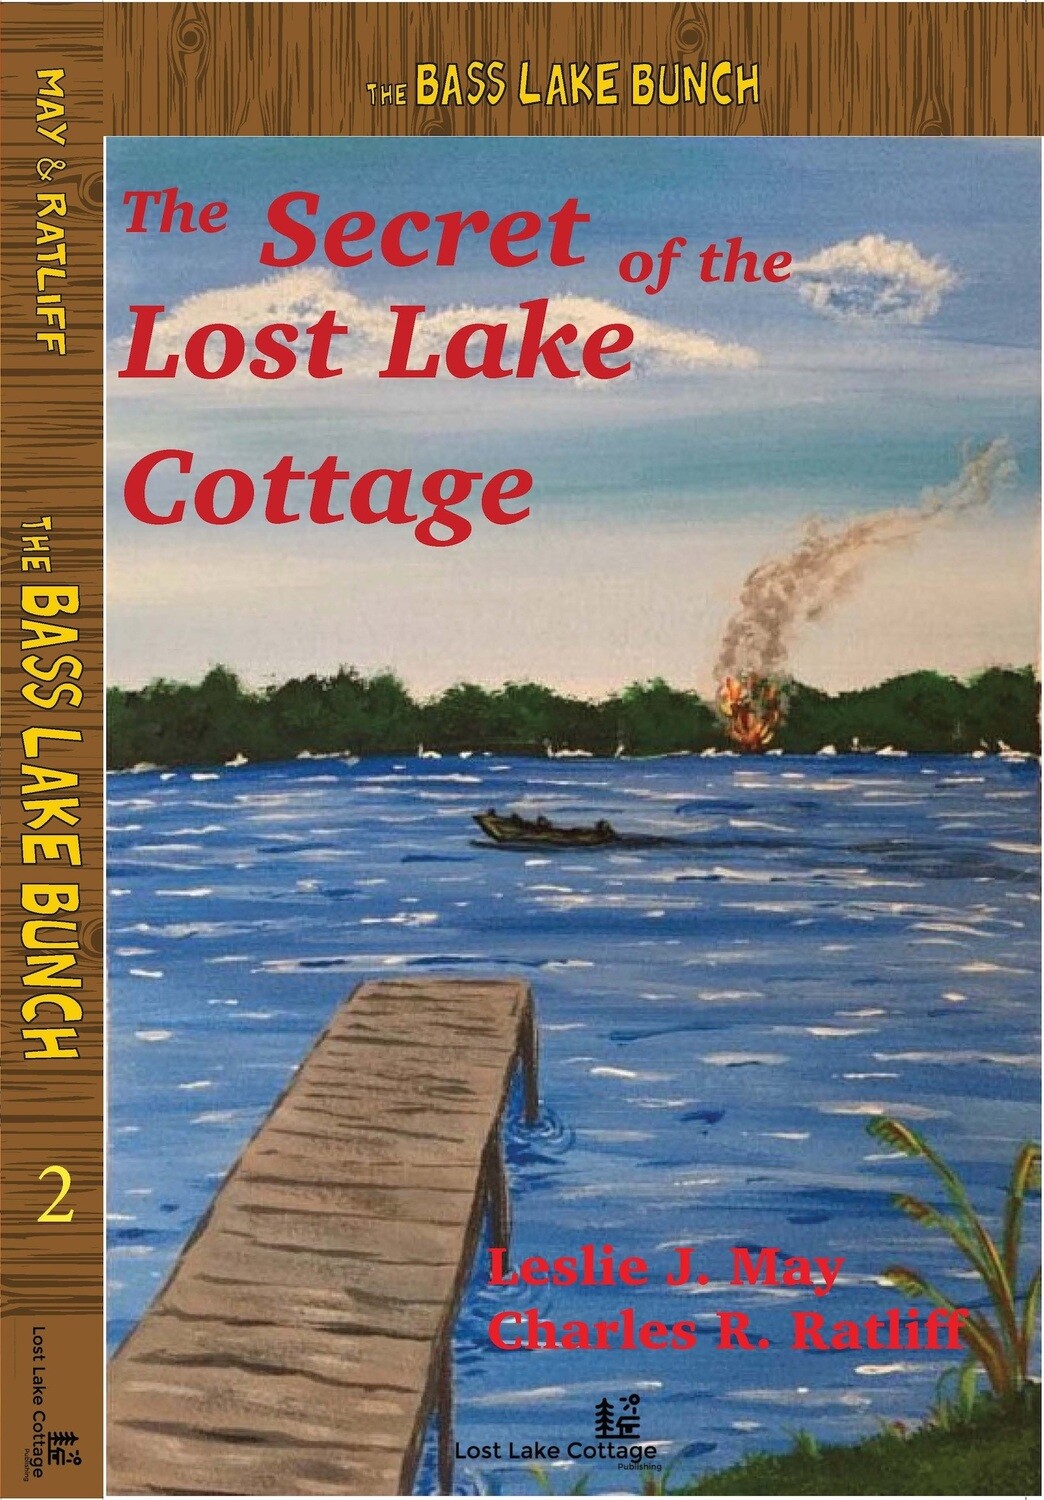 Bass Lake Bunch 2: The Secret of the Lost Lake Cottage